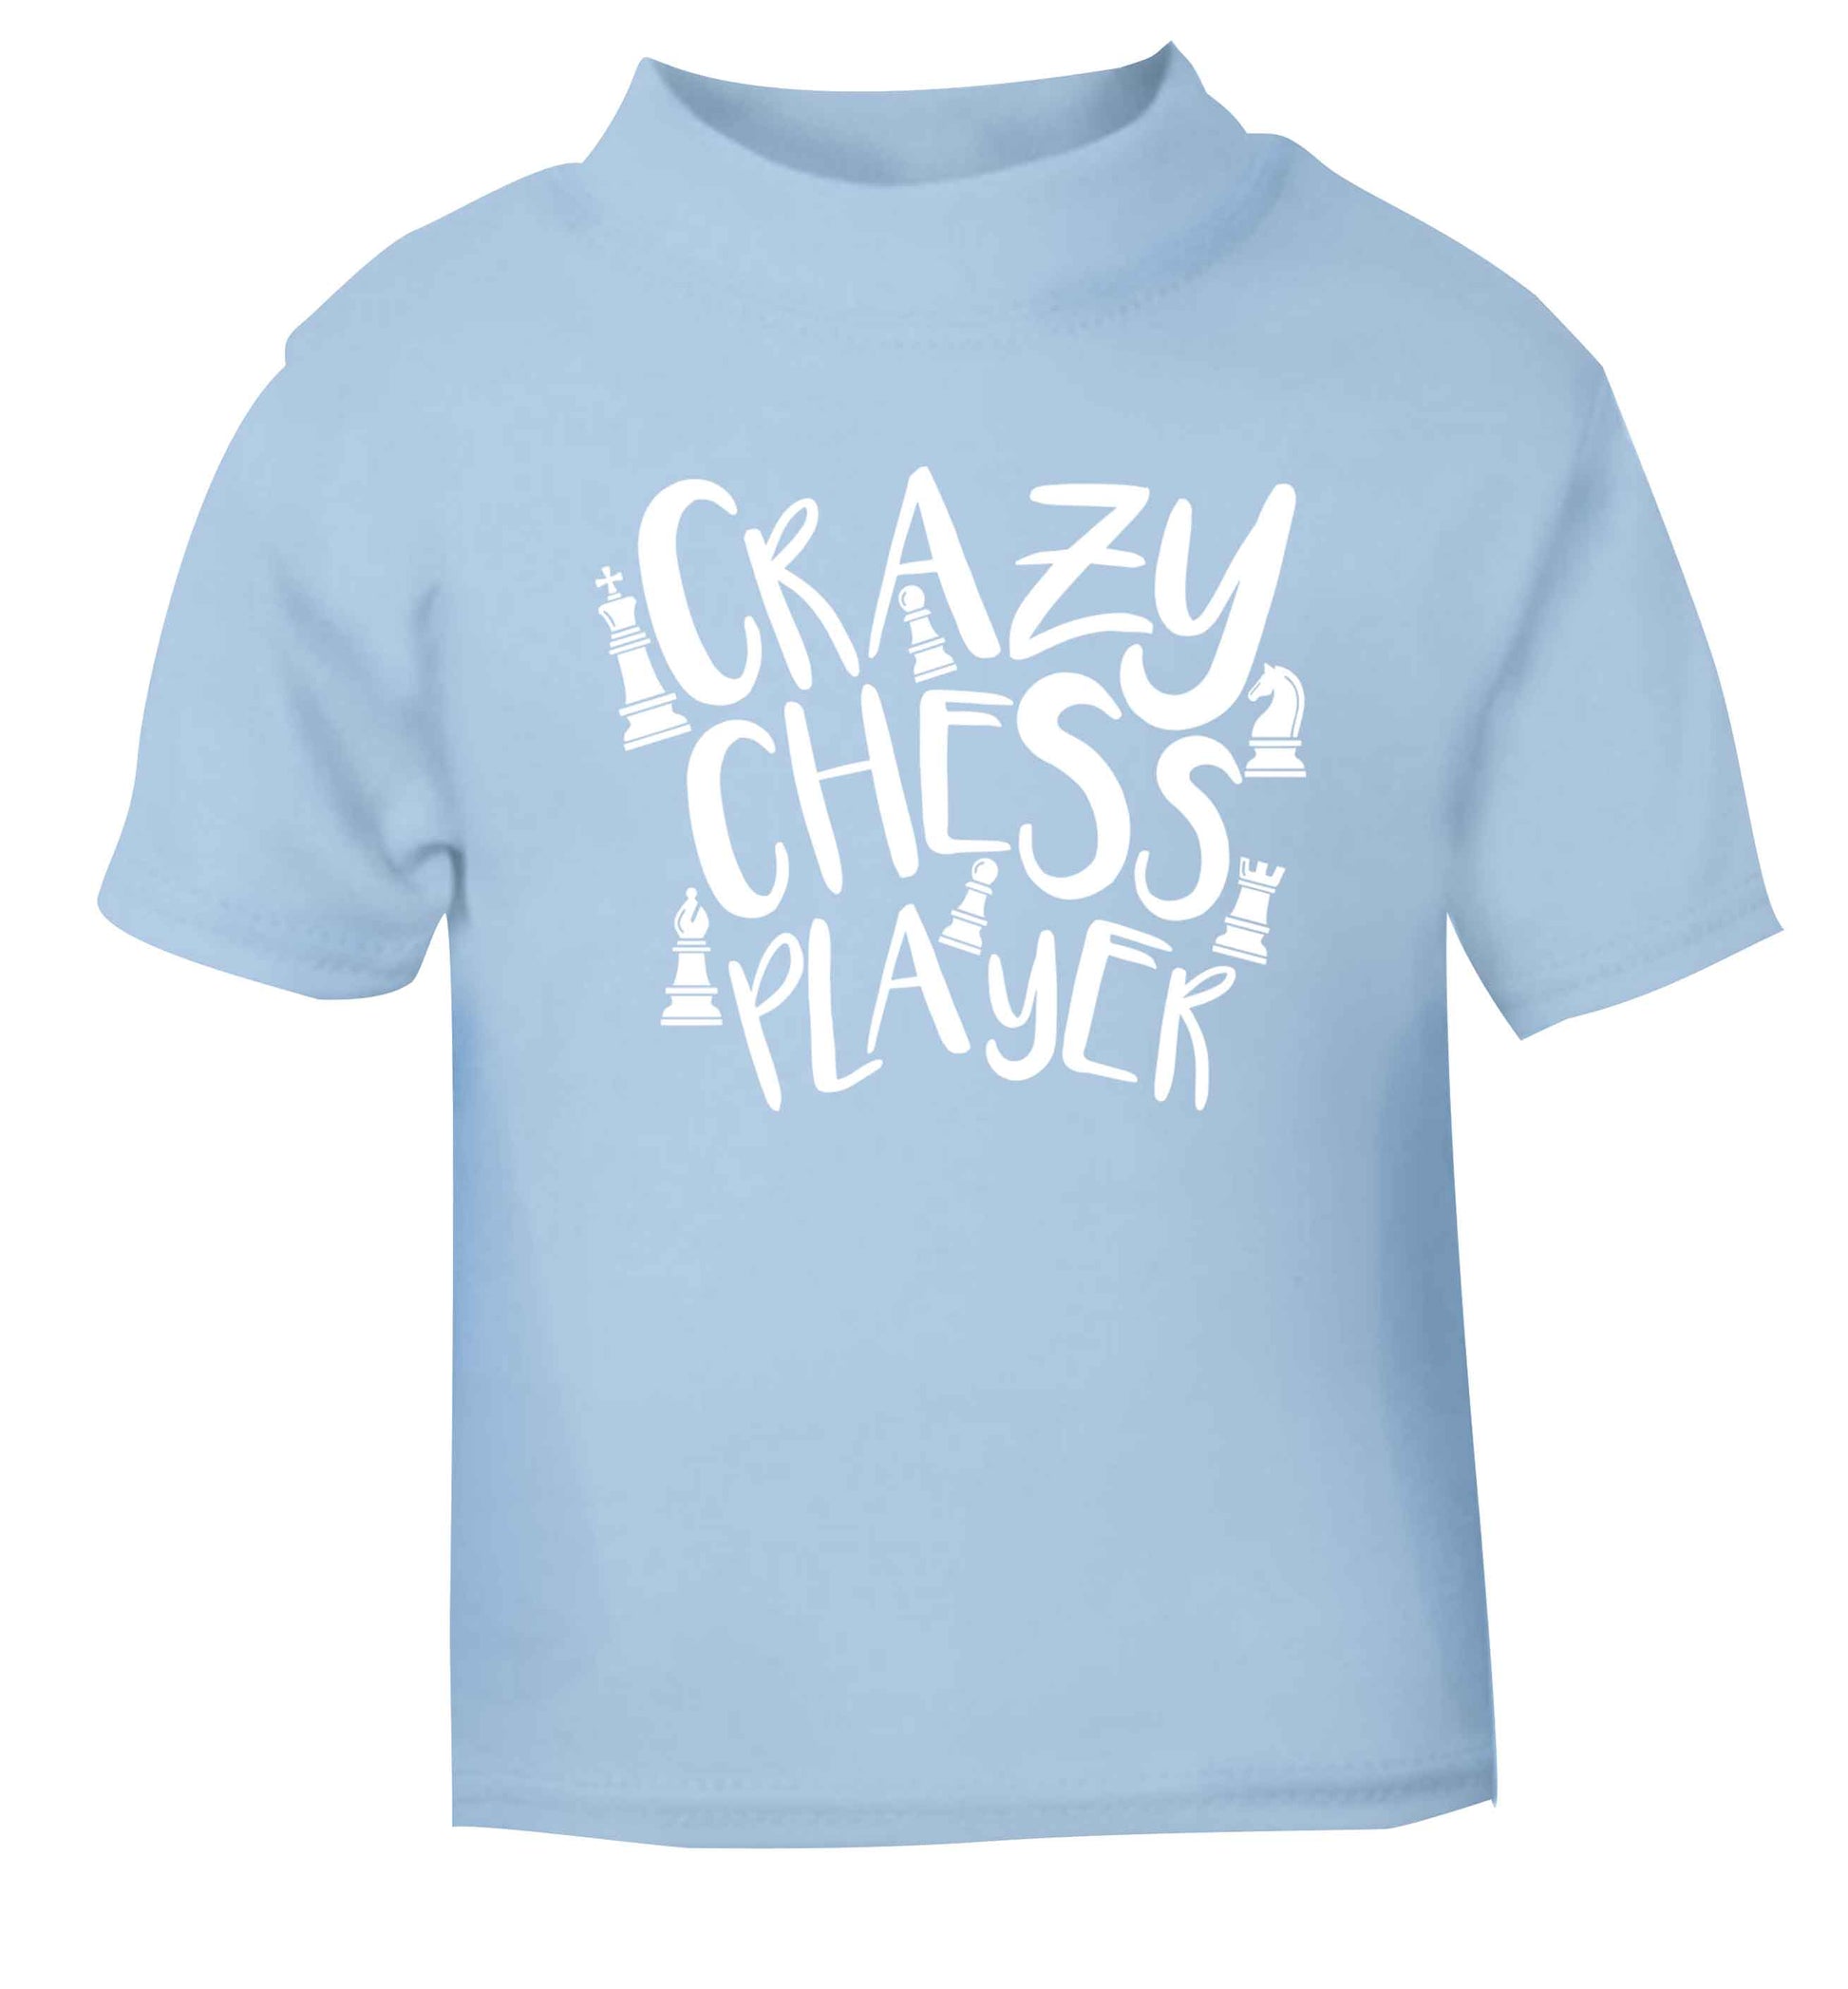 Crazy chess player light blue Baby Toddler Tshirt 2 Years